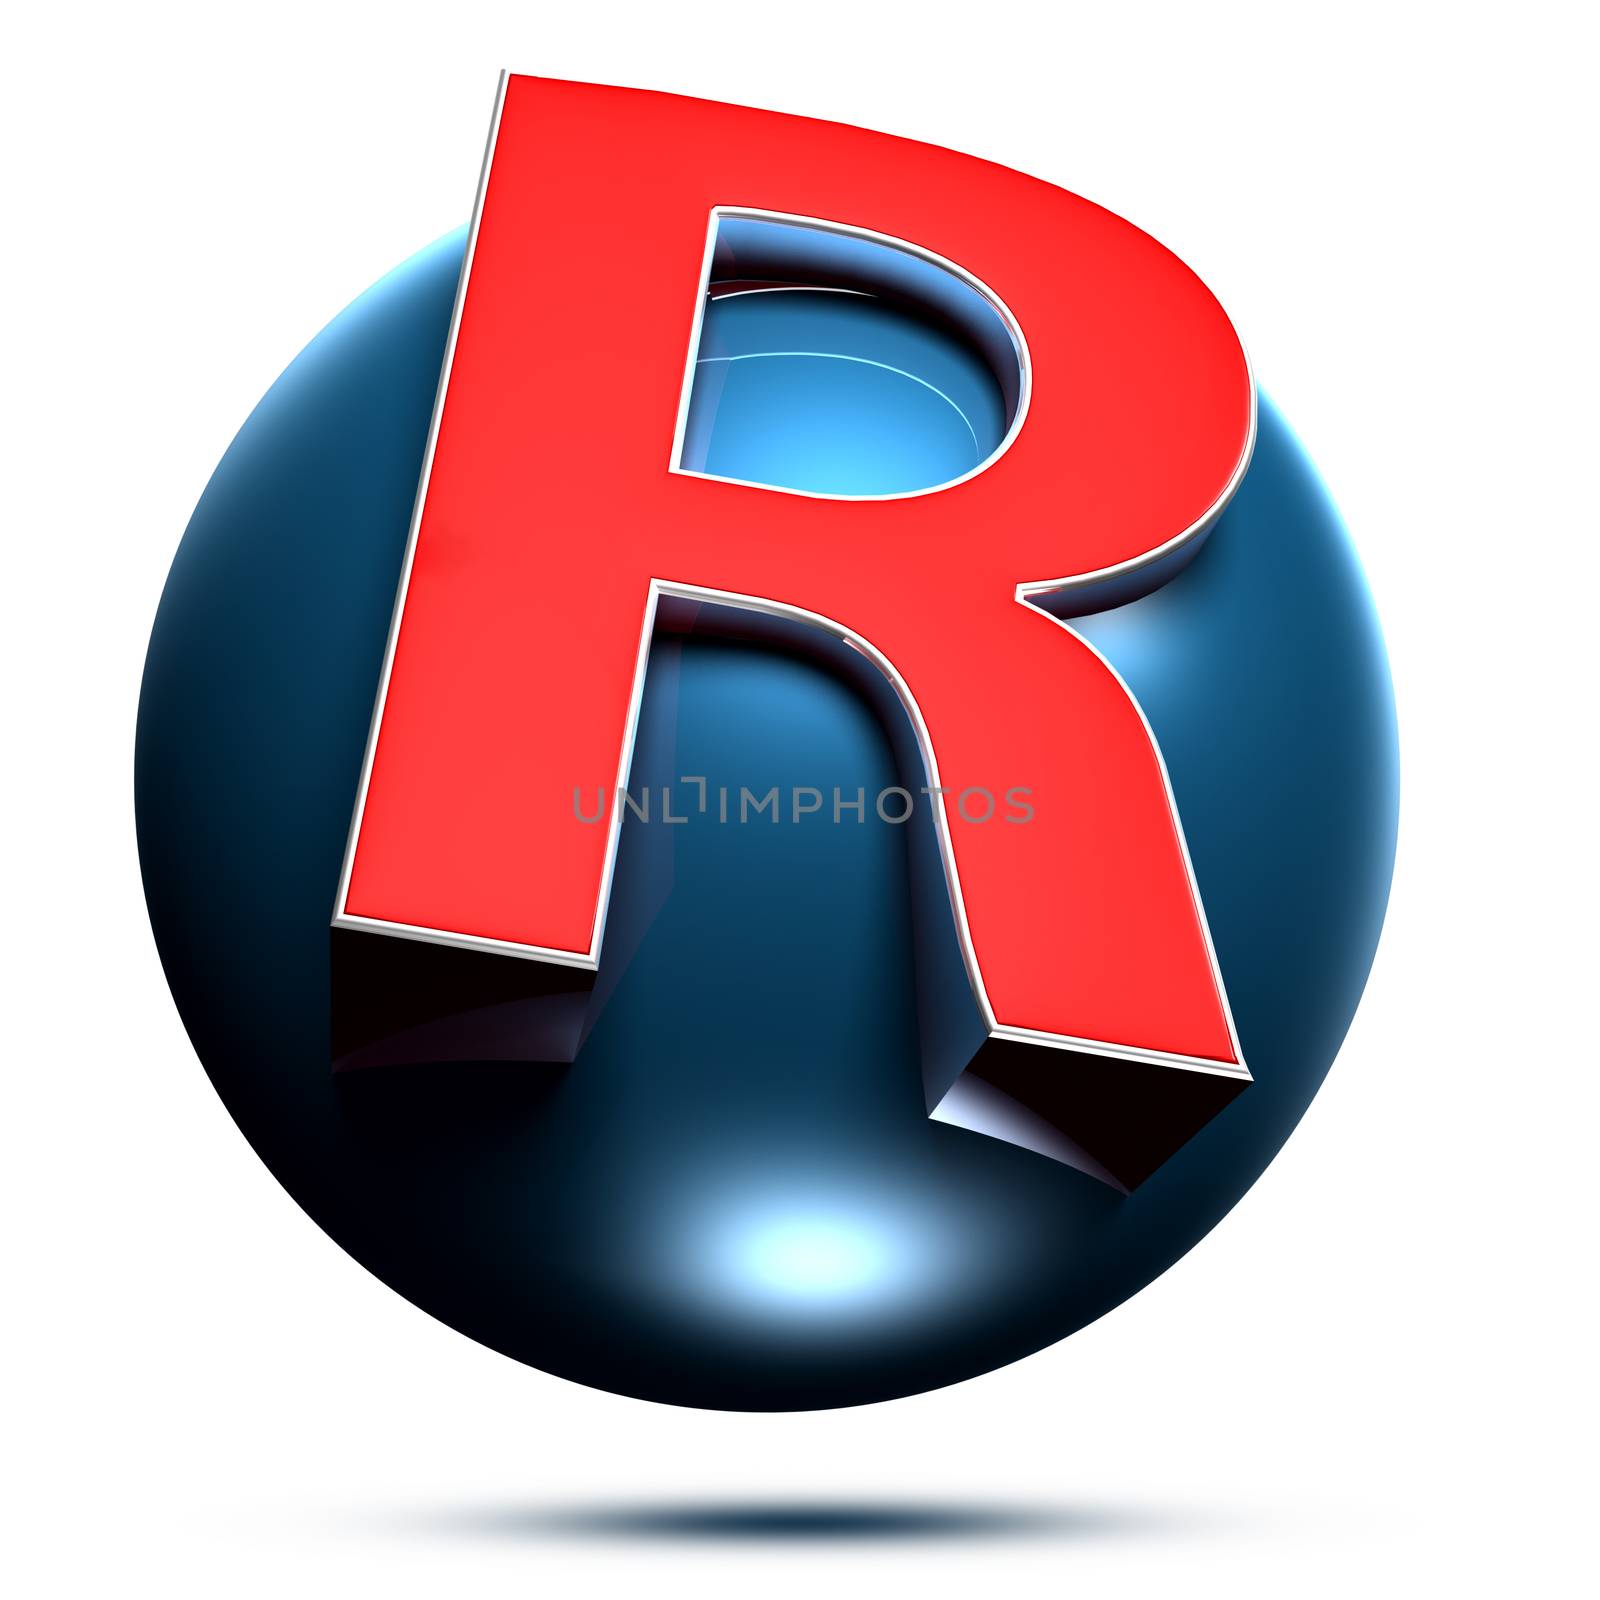 R logo isolated on white background illustration 3D rendering with clipping path.